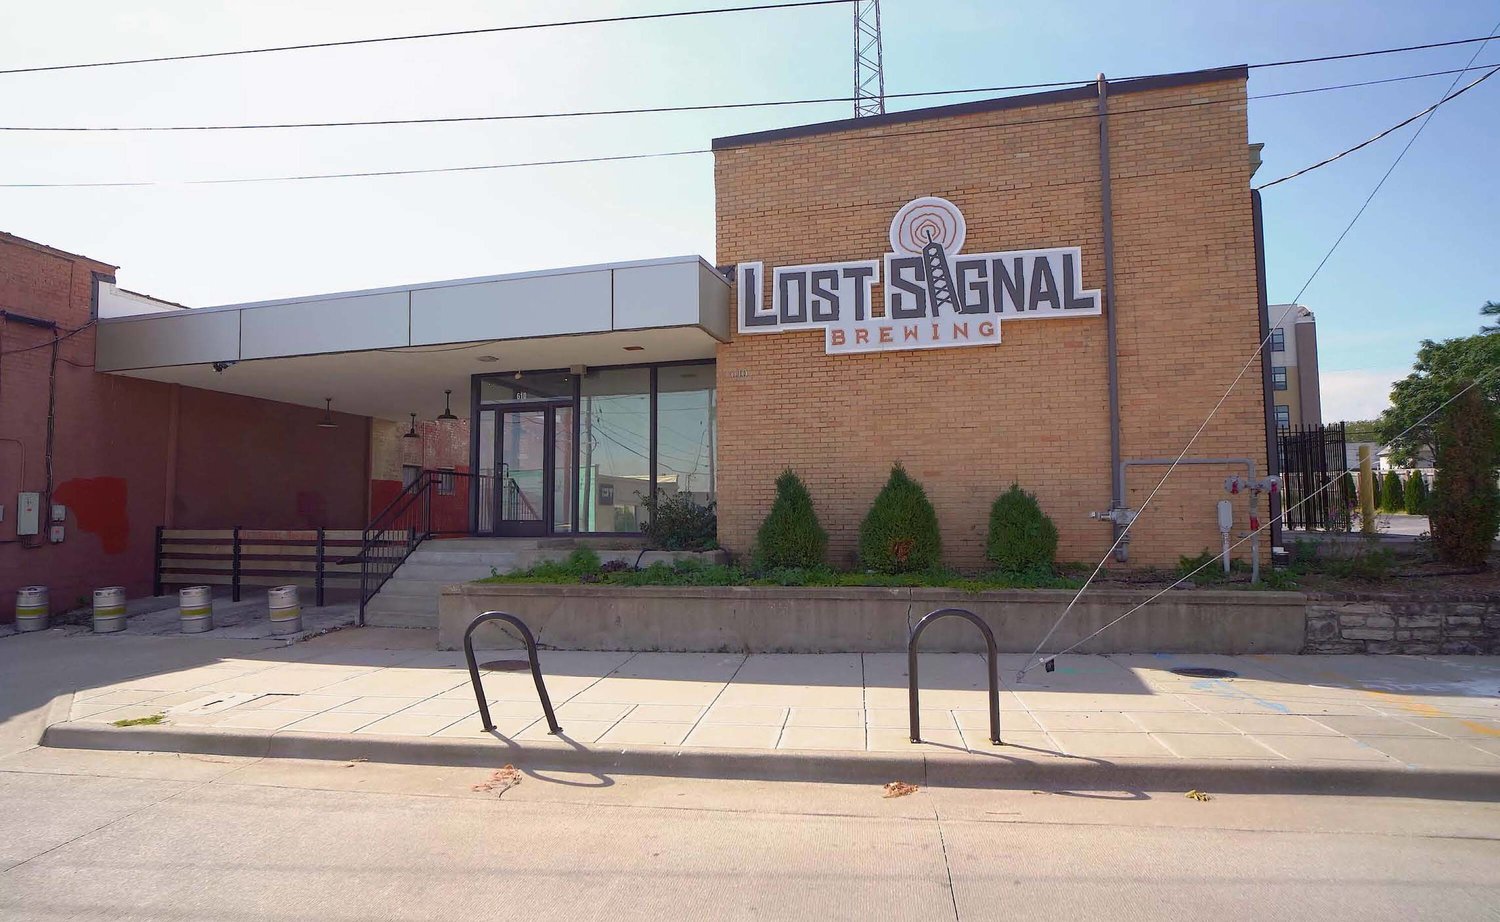 El Paraiso Mexican Kitchen is launching at the site left vacant by Lost Signal Brewing Co.